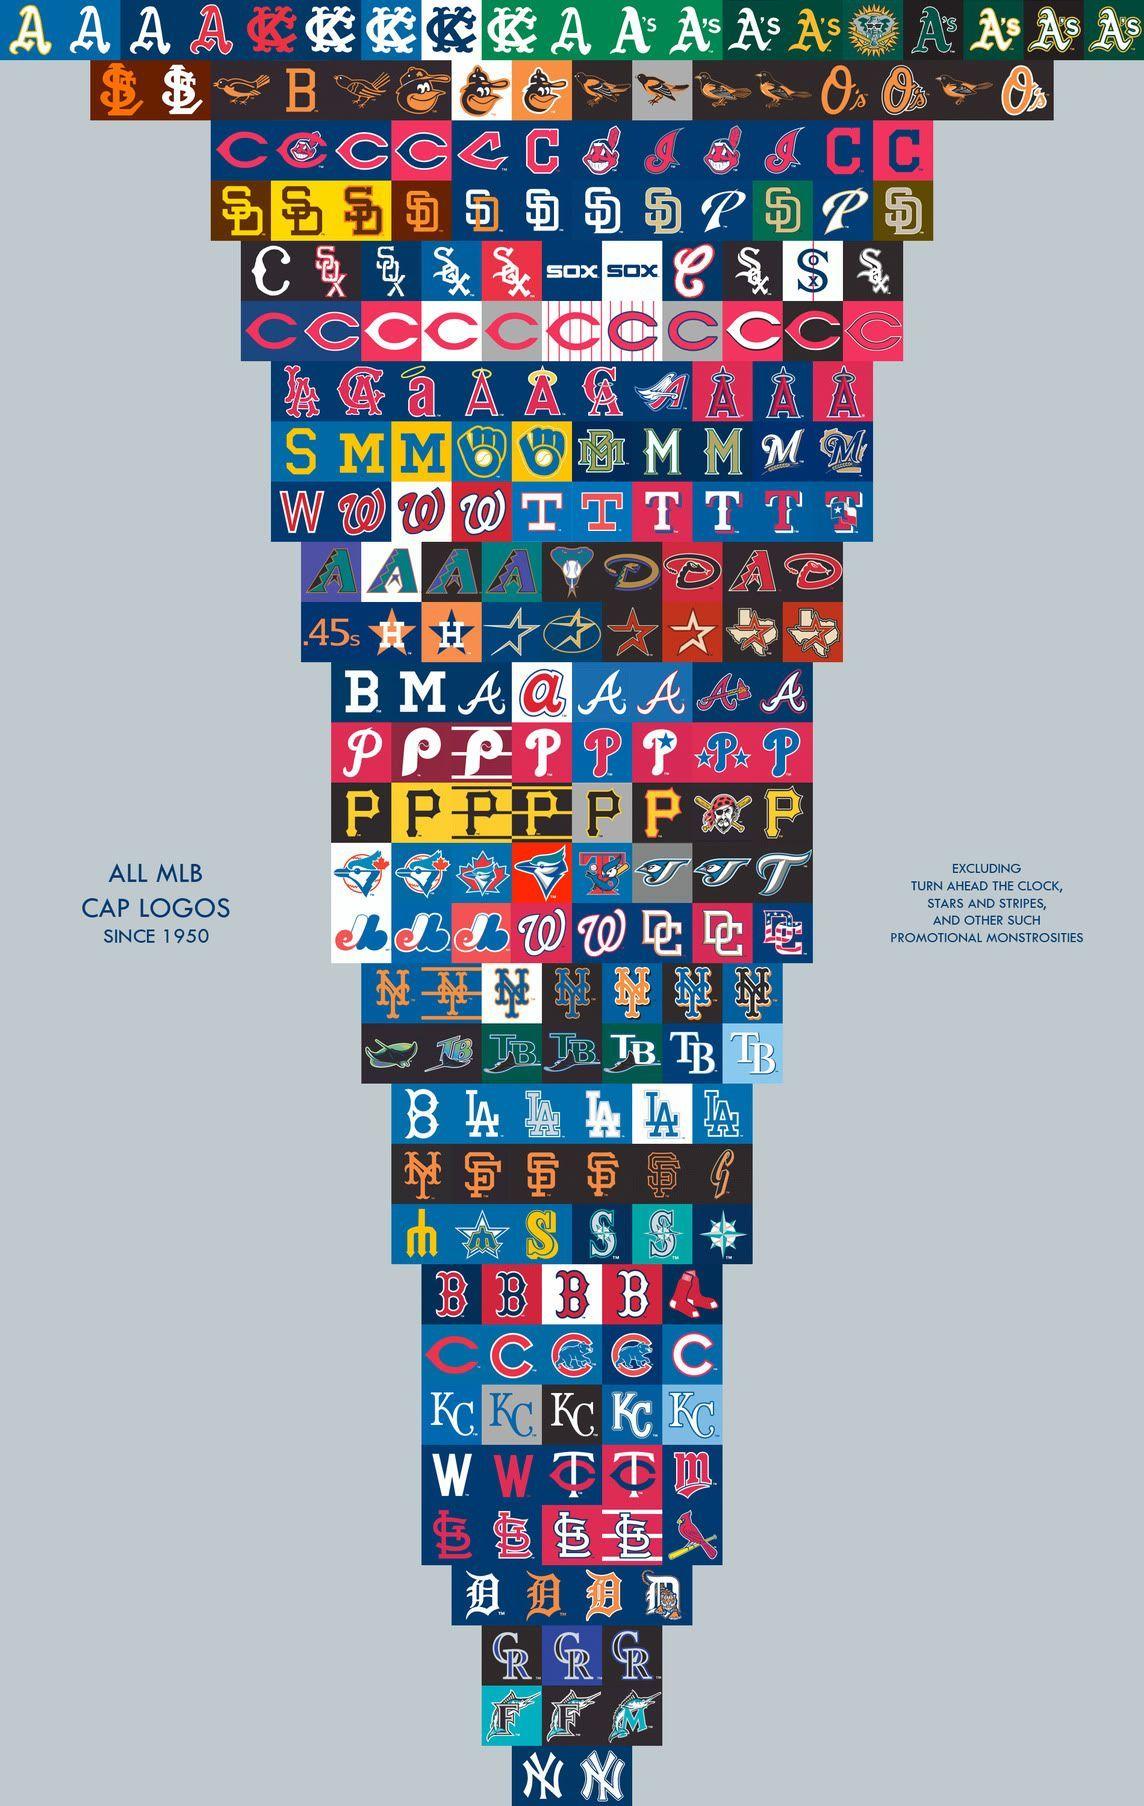 All MLB Logo - All the different permutations of every MLB logo over the years